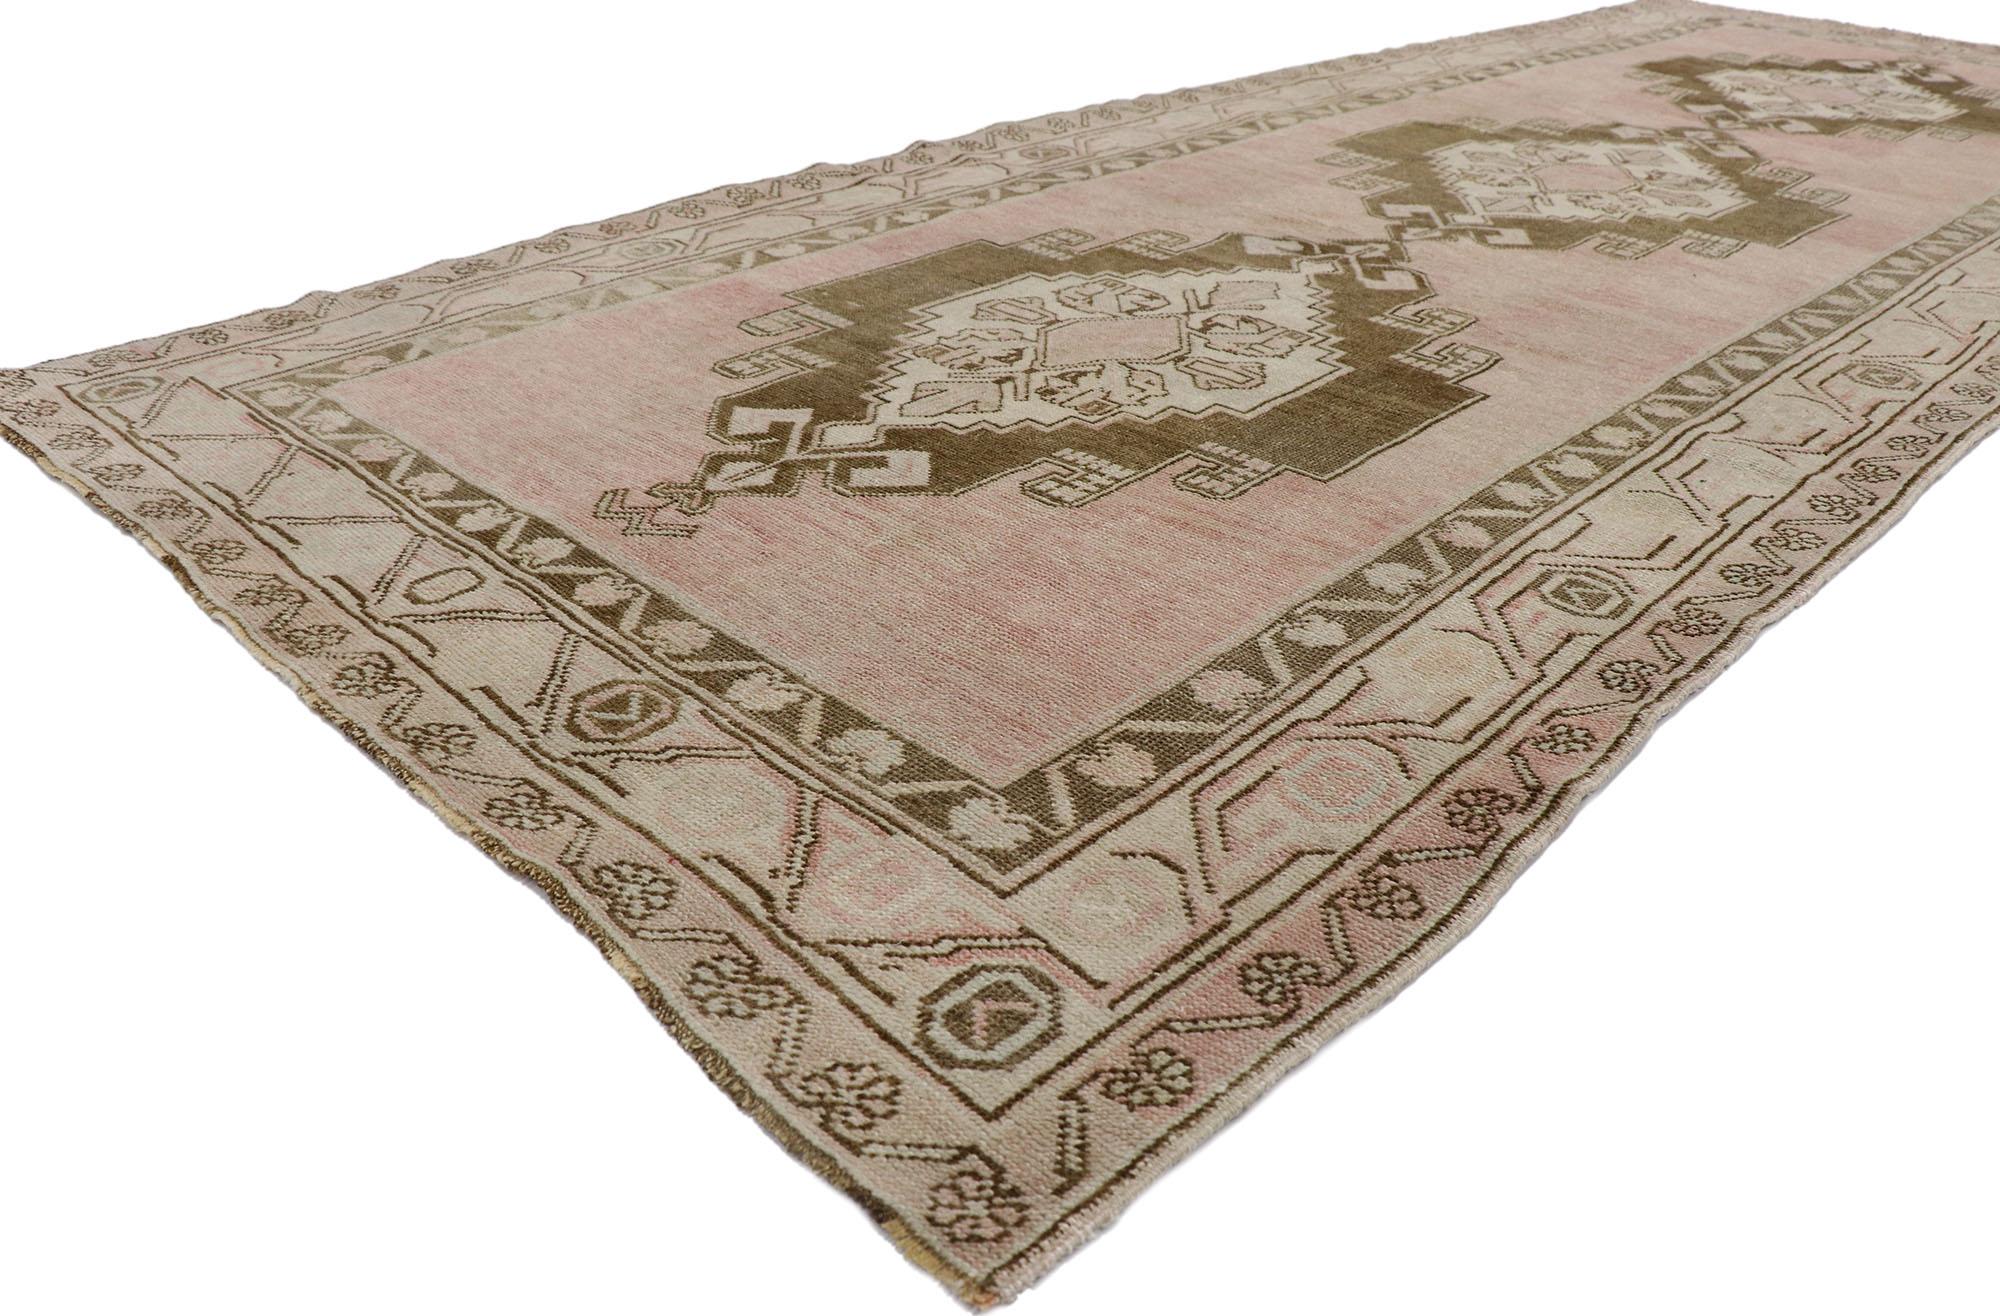 53618 Vintage Turkish Oushak Gallery rug with Boho Chic Tribal Style 04'08 x 12'00. With its expressive tribal design and soft colors, this hand-knotted wool vintage Turkish Oushak gallery rug is a captivating vision of woven beauty. The abrashed